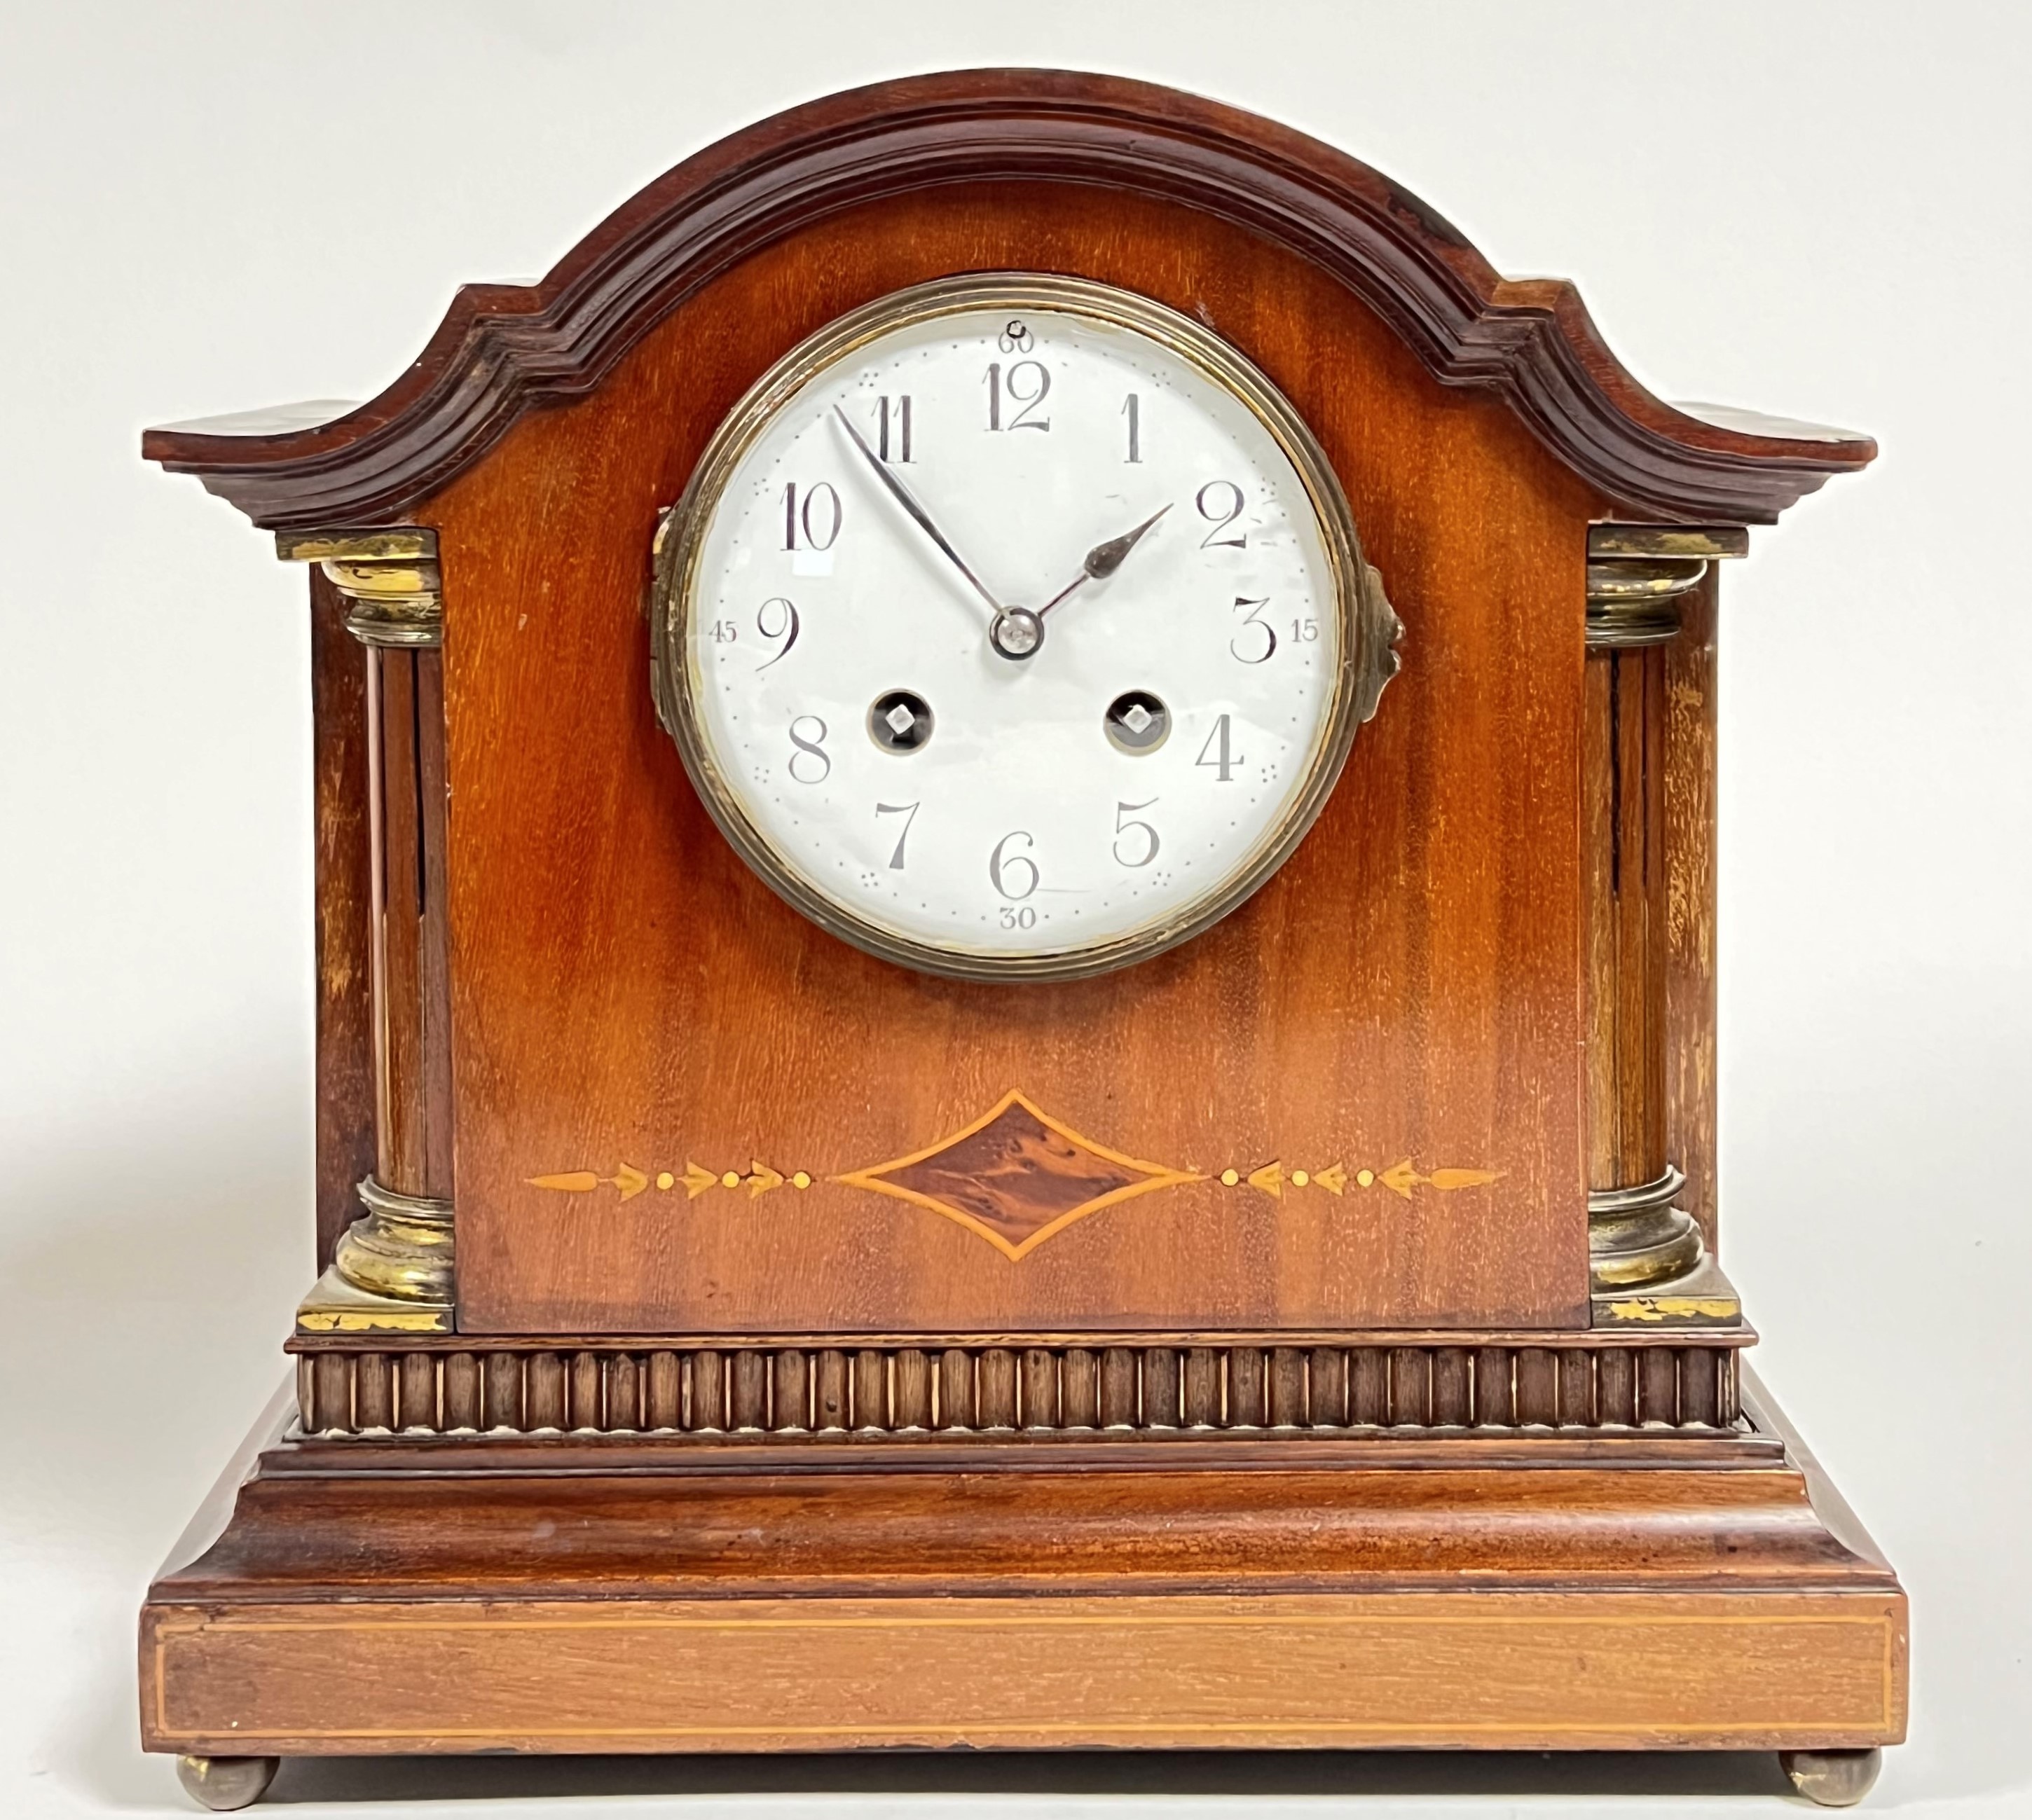 An Edwardian inlaid mahogany 8-day mantle clock, the enamel dial with black Arabic numerals